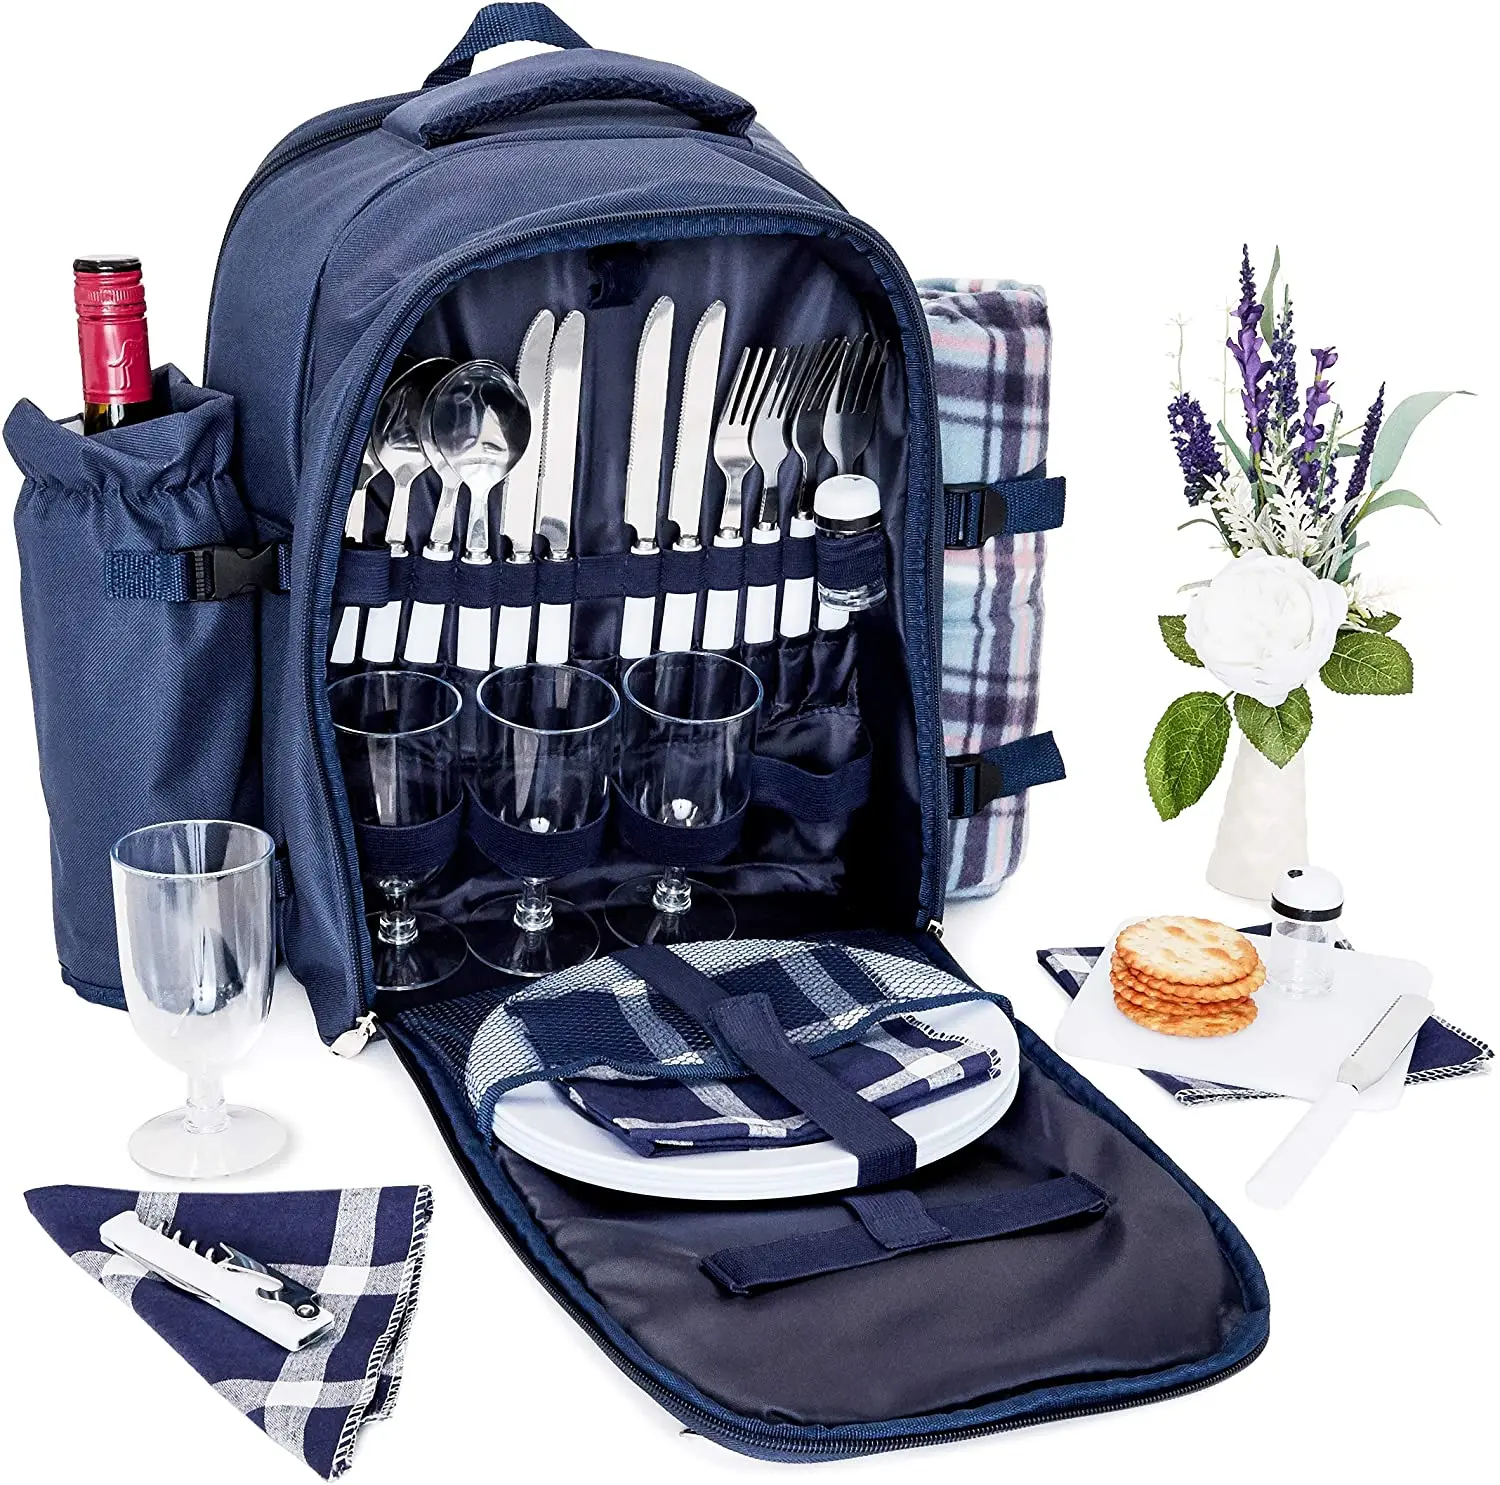 Apollo Walker Picnic Backpack Bag for 2 Person with Cooler Compartment